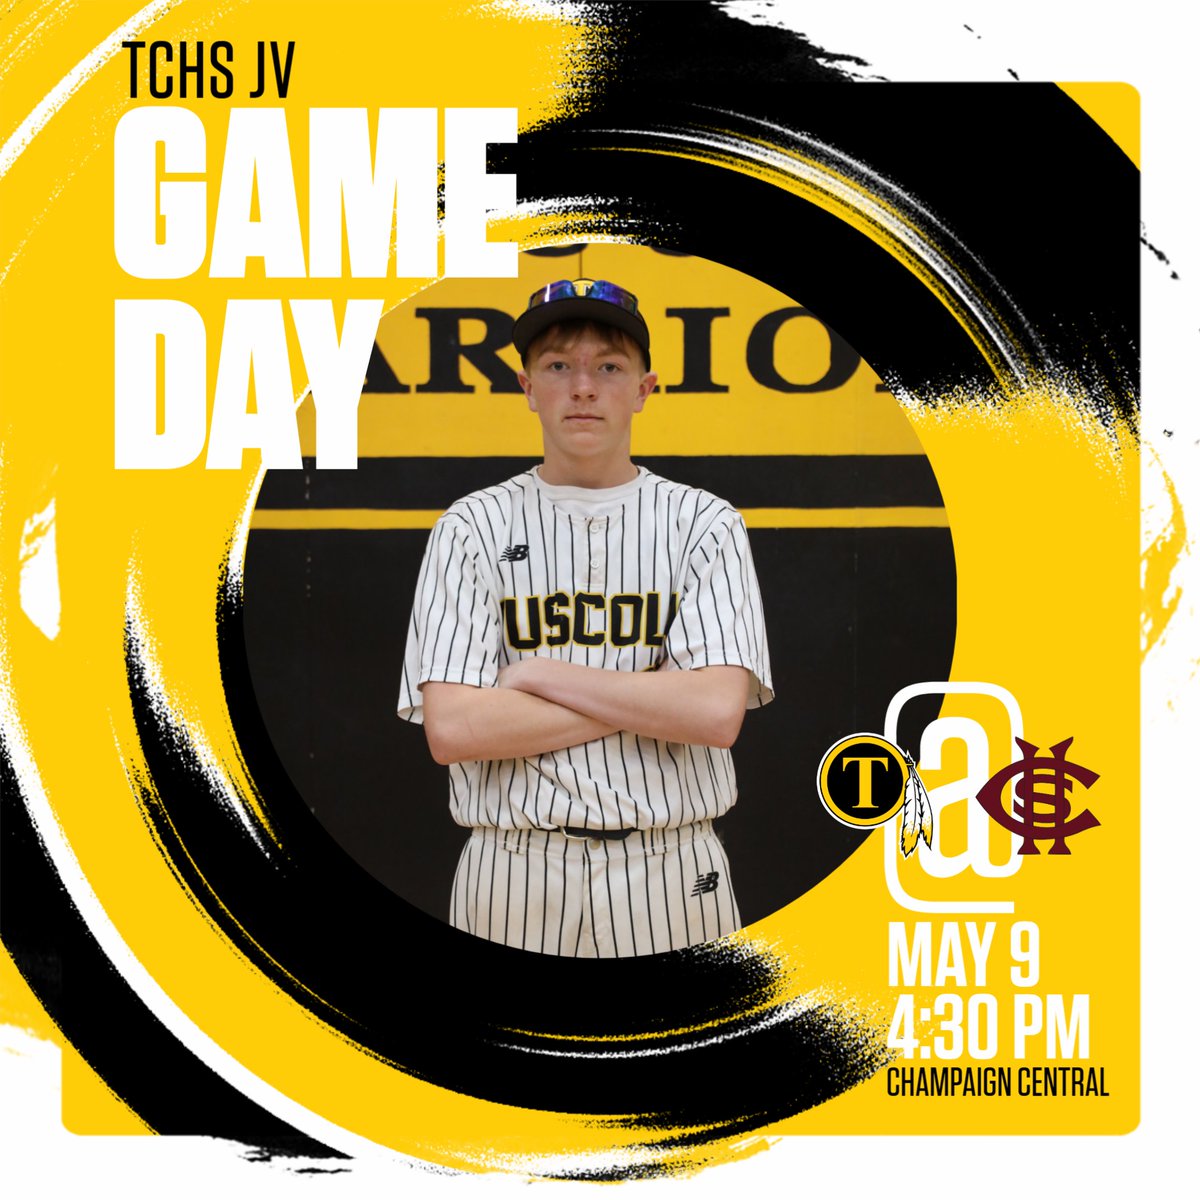 Good luck JV Baseball as they head to Champaign Central!